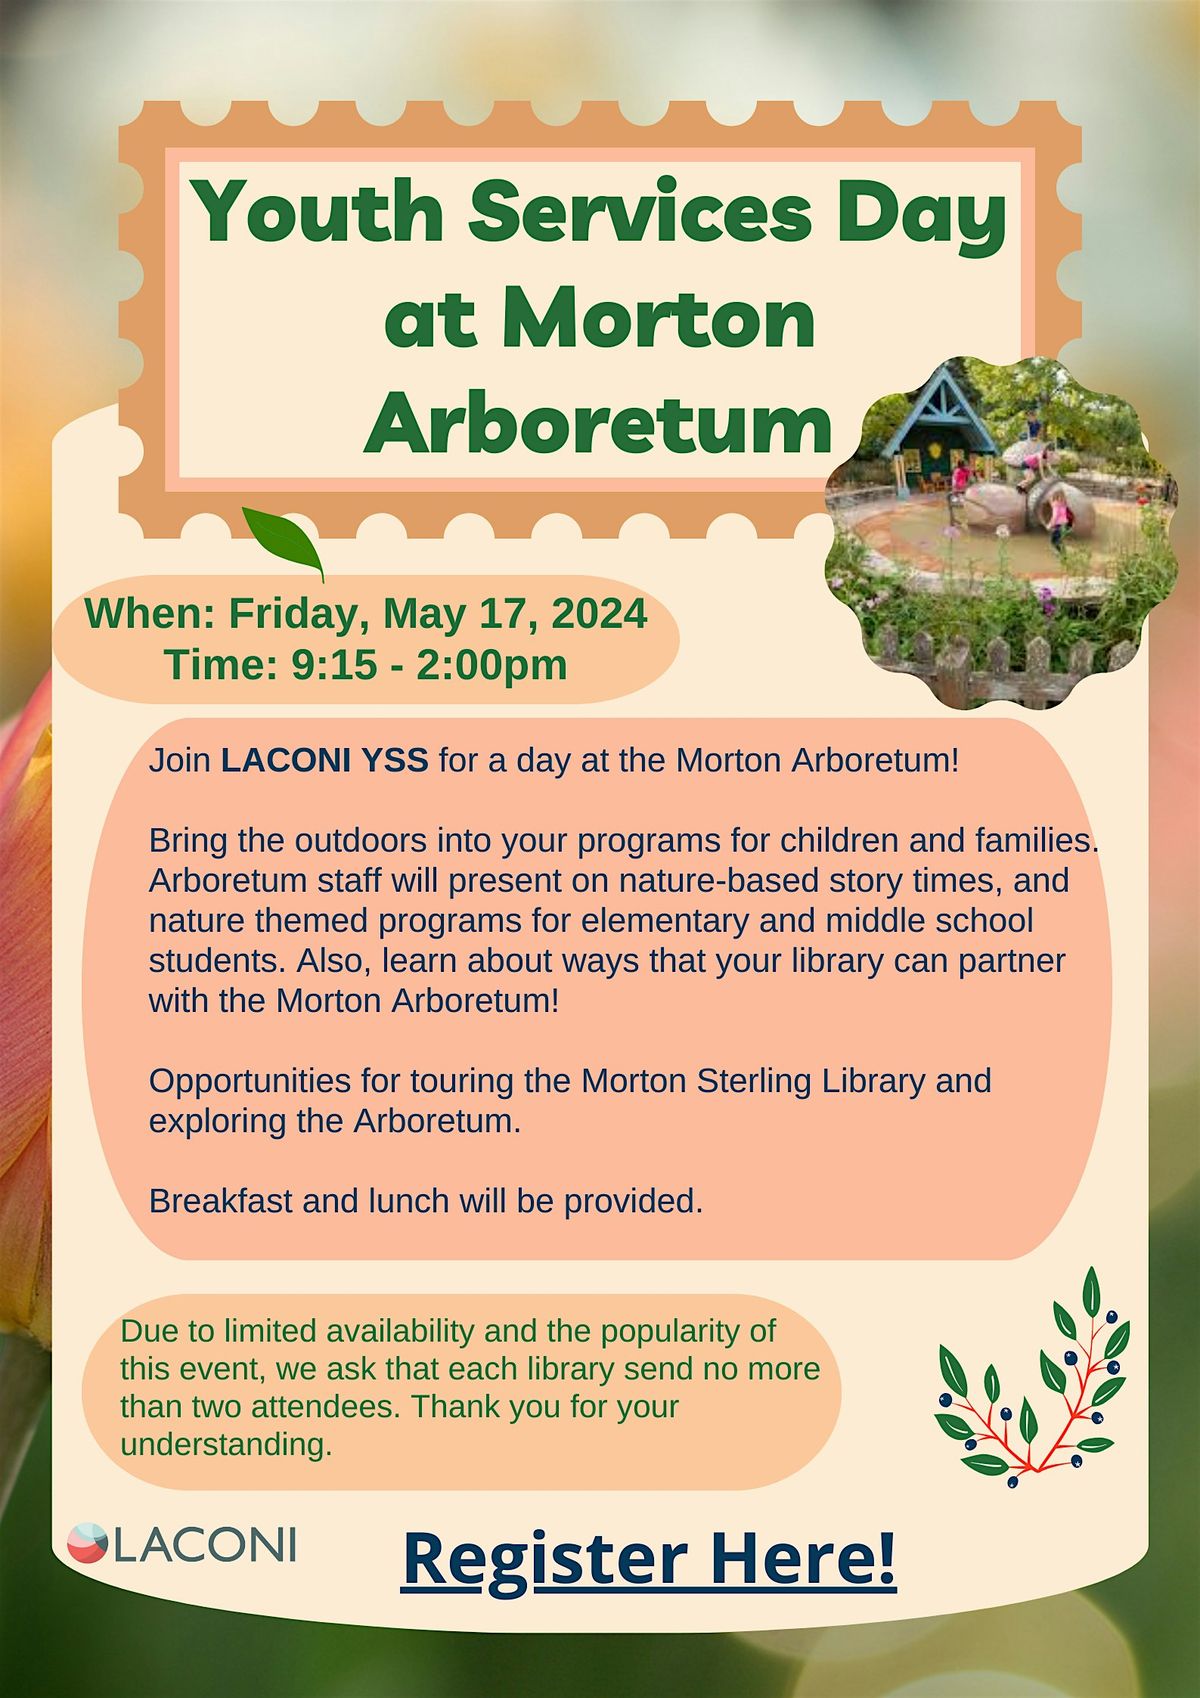 Youth Services Day at Morton Arboretum